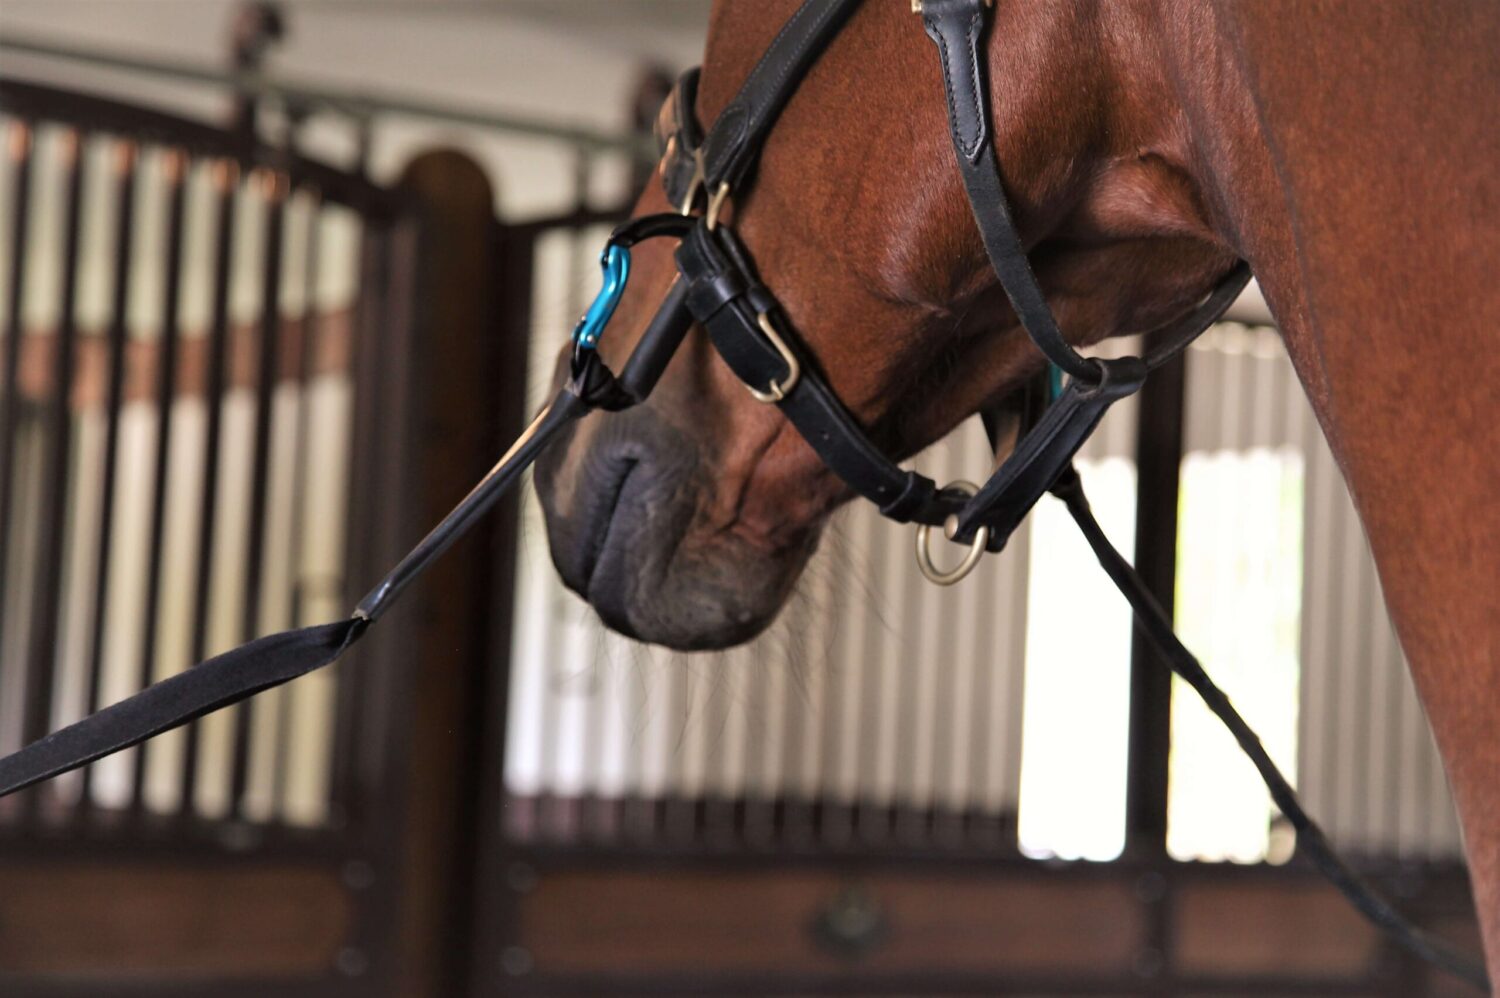 Ties for horse in stable show a innovative break away tie up system for horses.